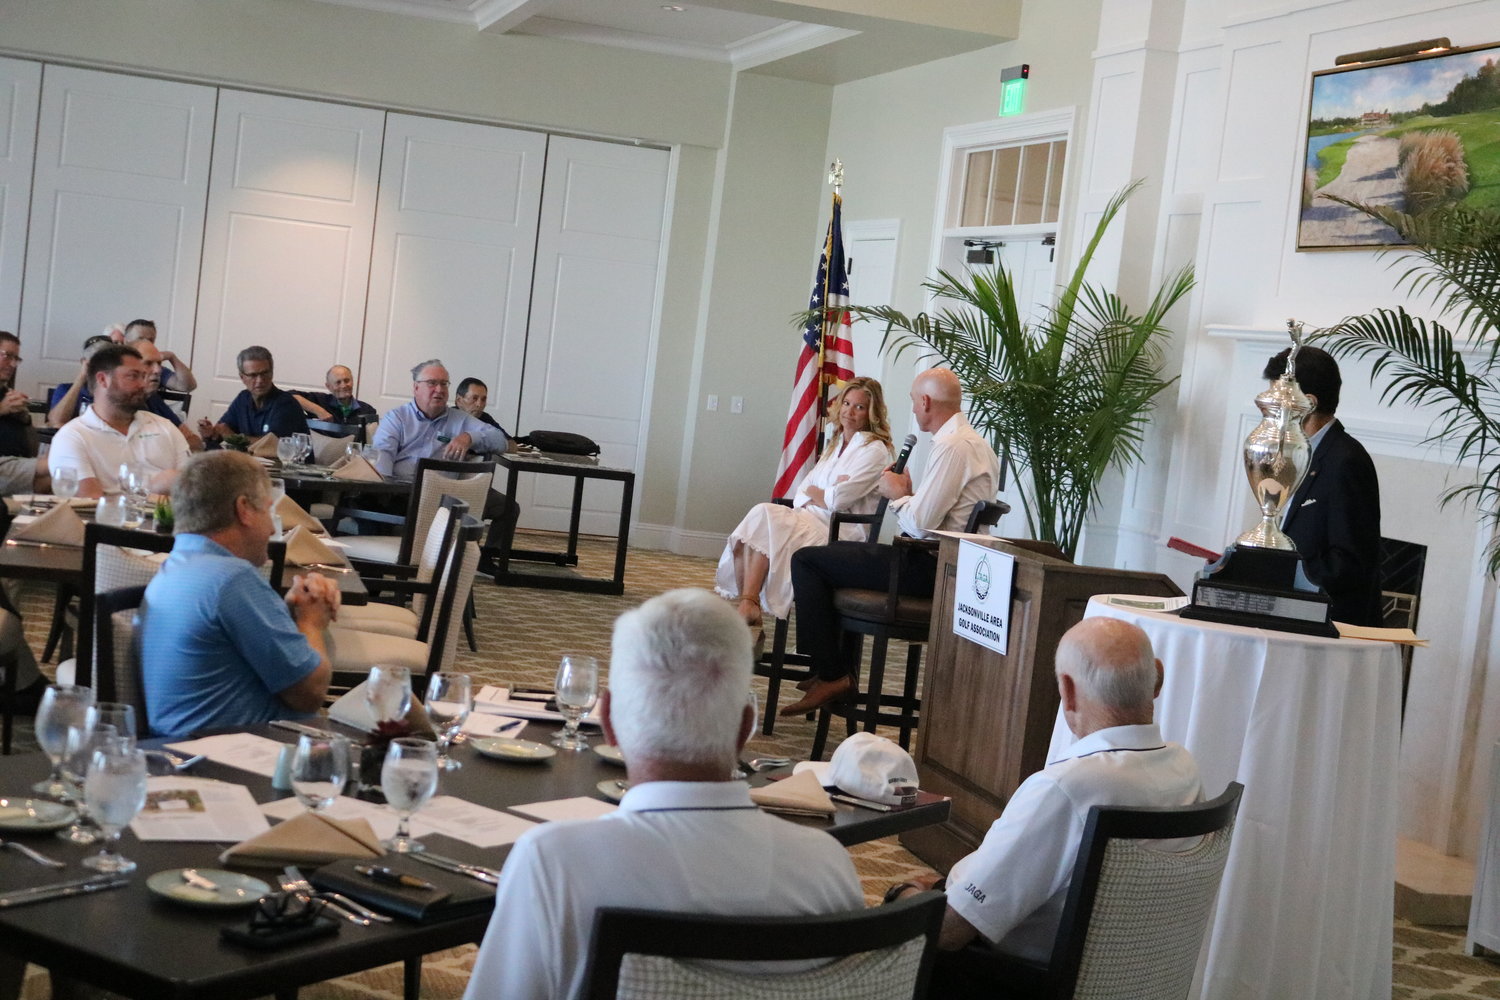 About 26 clubs from around the area were represented and on hand to hear from guest speakers Jim and Tabitha Furyk during the Aug. 31 JAGA meeting.